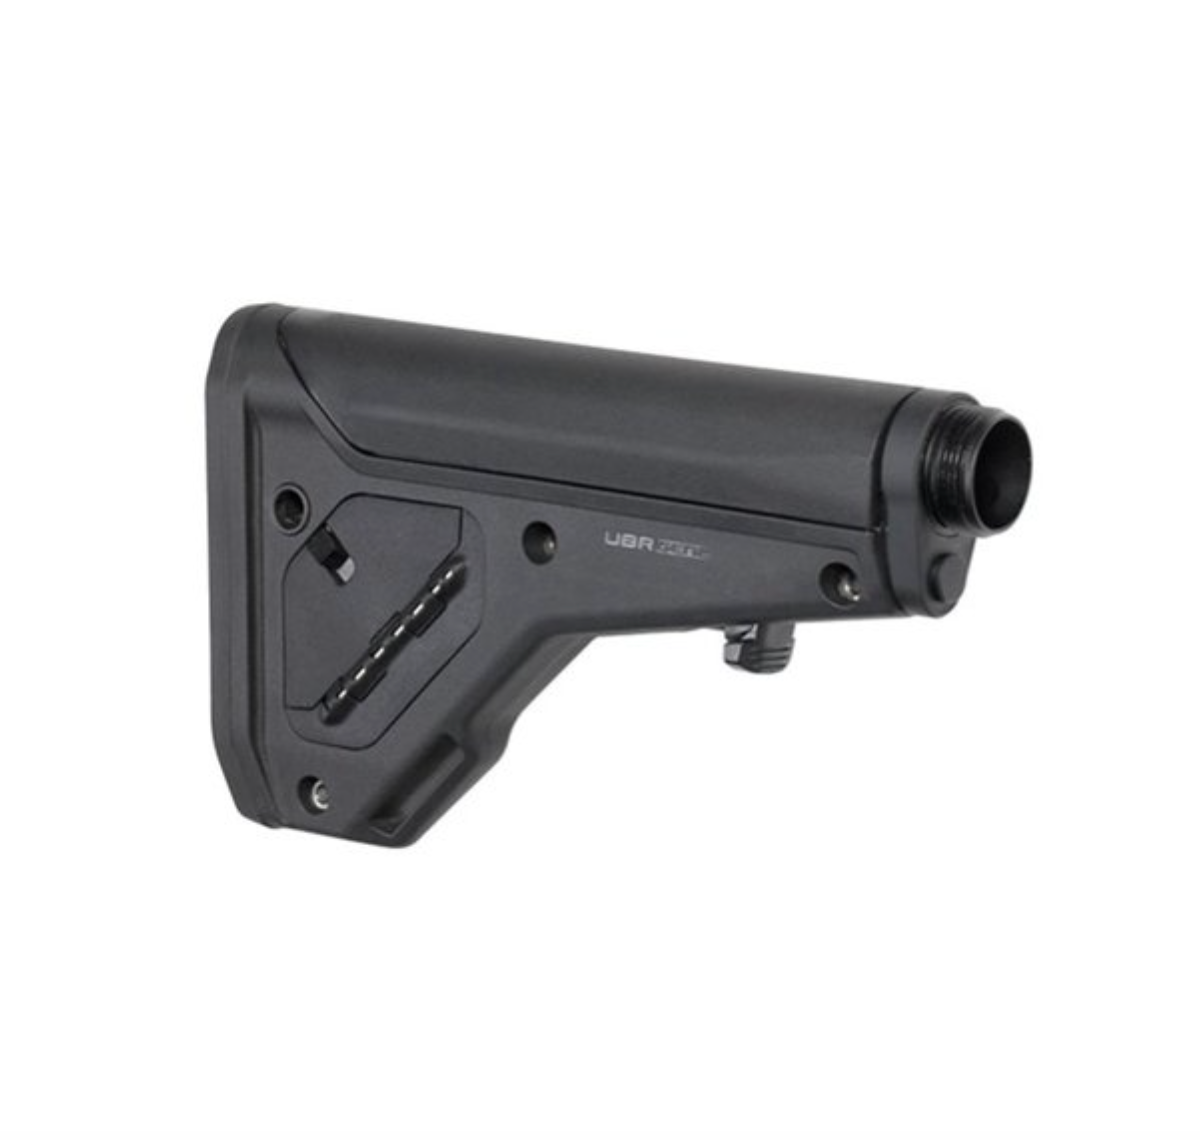 MAGPUL AR-15 UBR 2.0 Collapsible Stock Collapsible A5 Length - Black - RPI Supplies